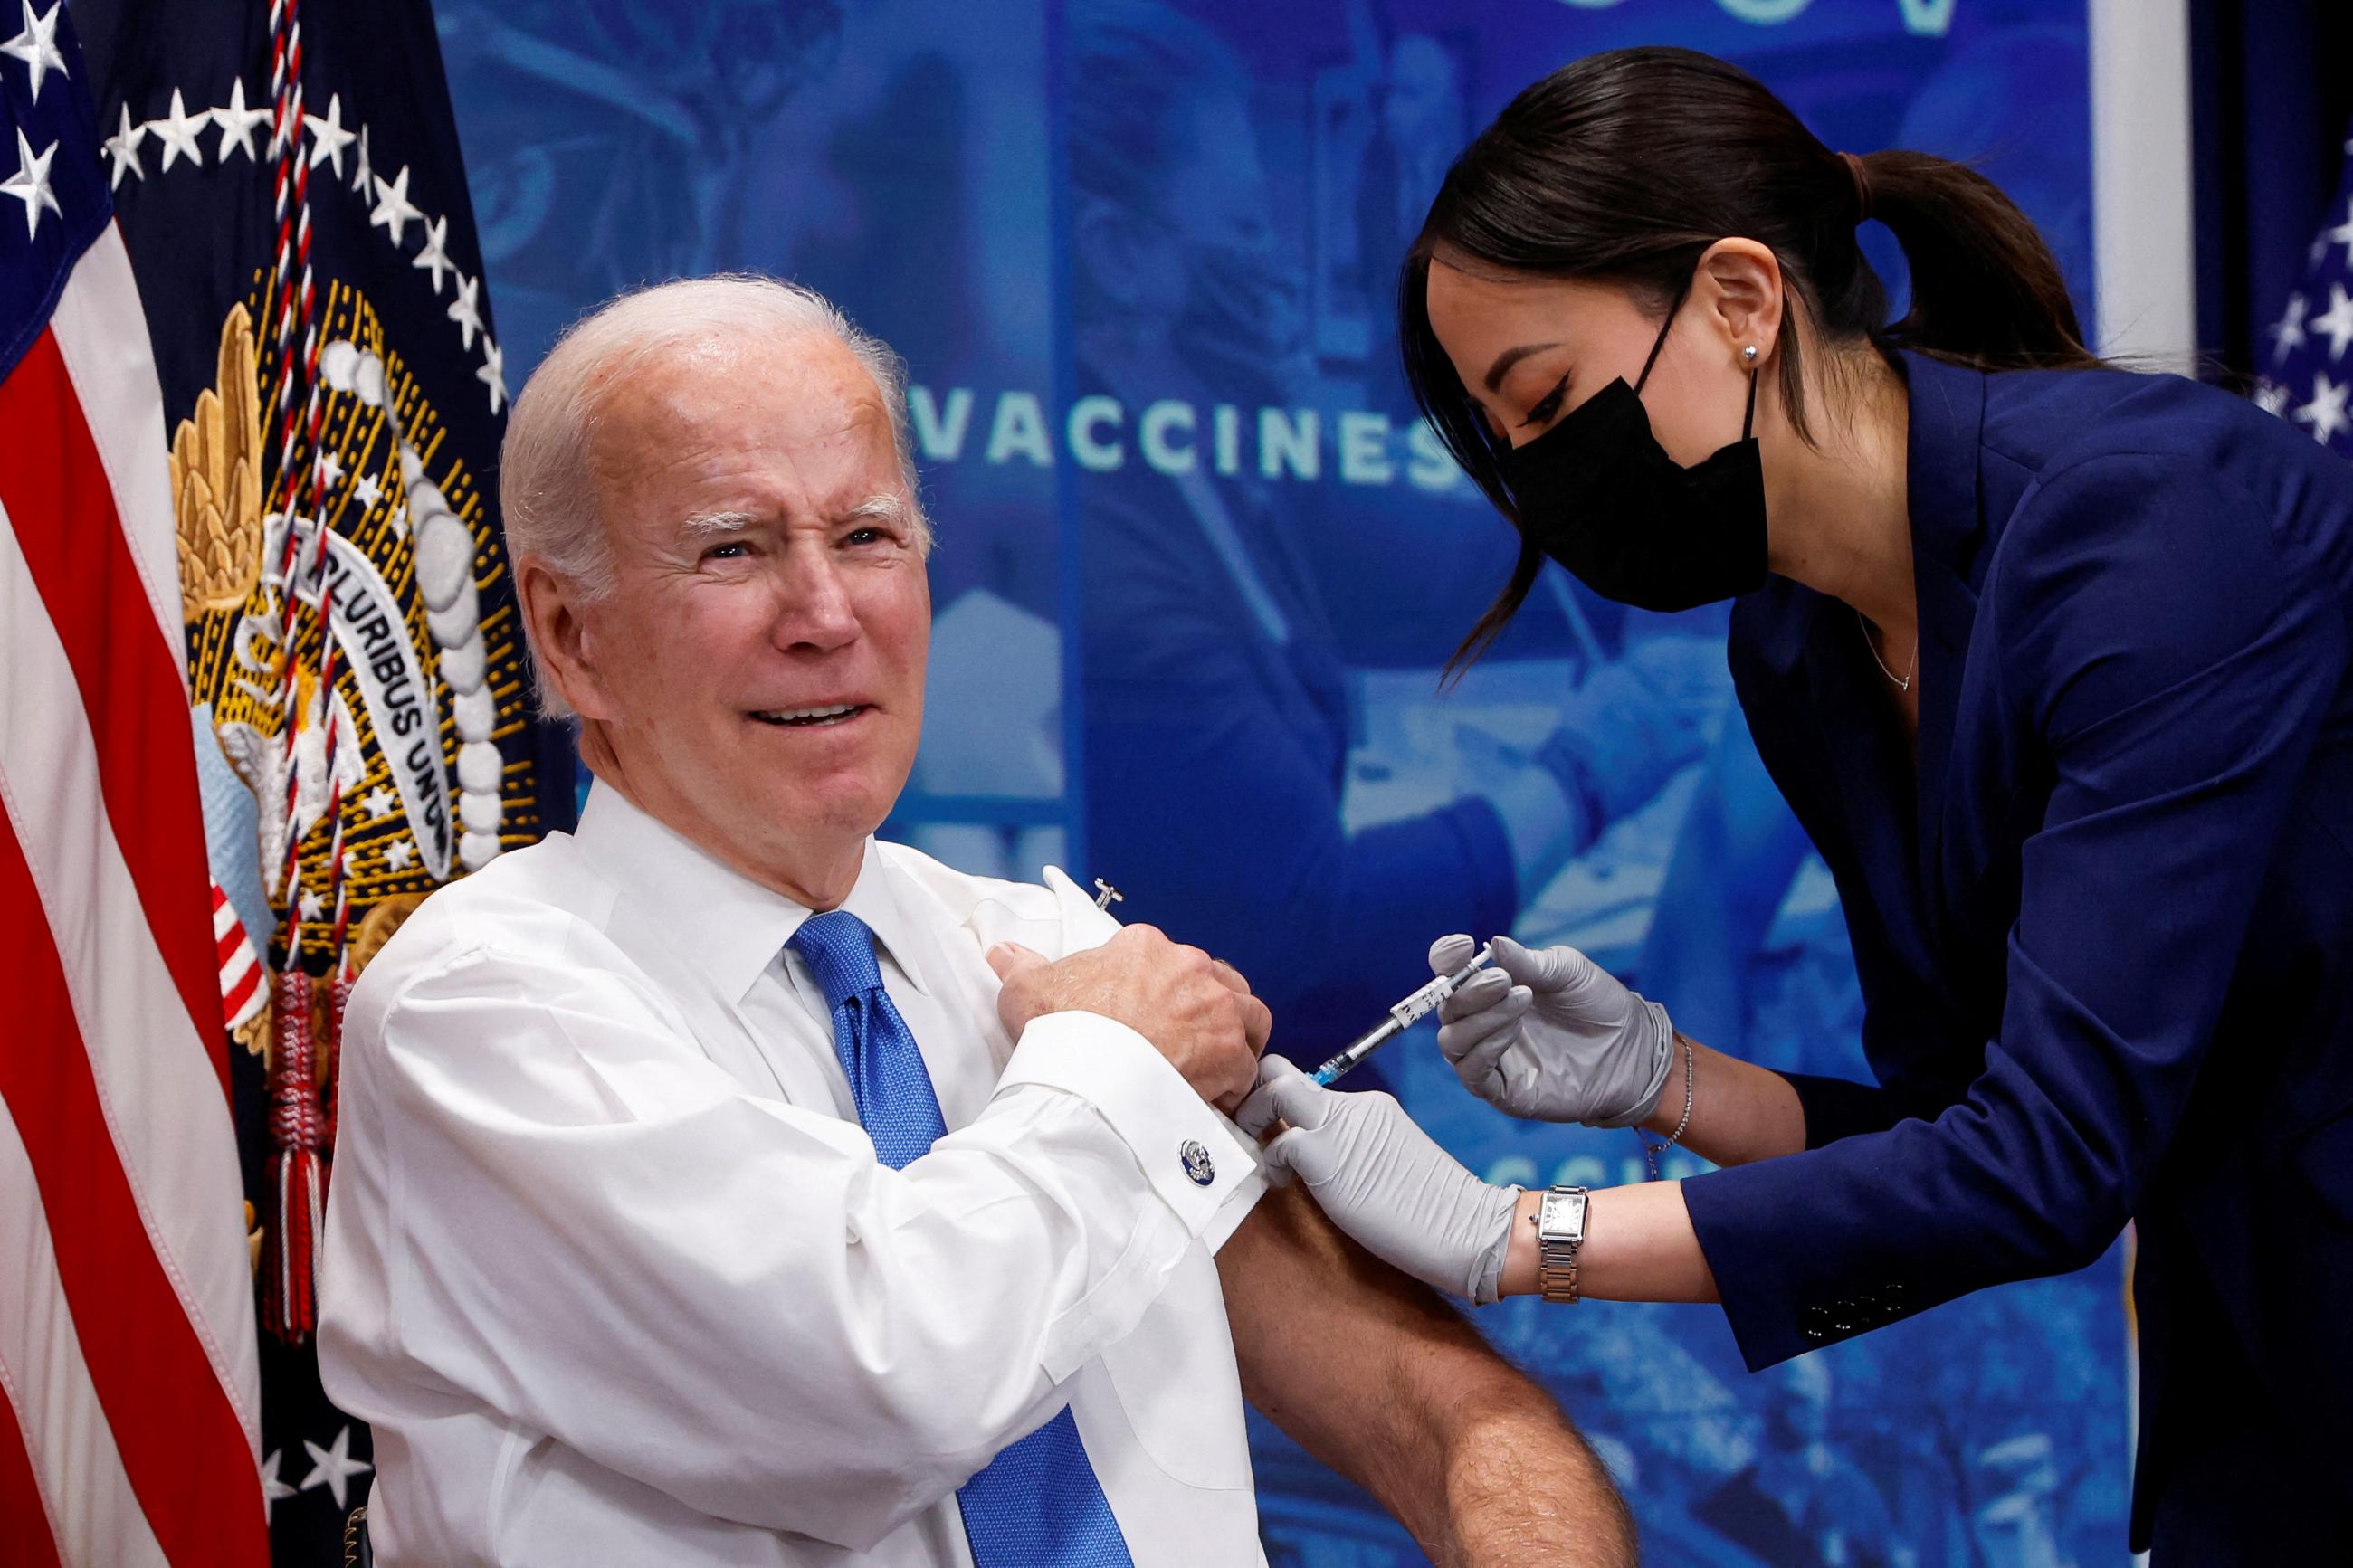 U.S. President Joe Biden, sleeve rolled up on his white shirt, receives a COVID-19 vaccine from a health worker wearing a dark blue suit at the launch of a new plan for Americans to receive booster shots and vaccinations, at the White House, Washington, DC, on October 25, 2022. 